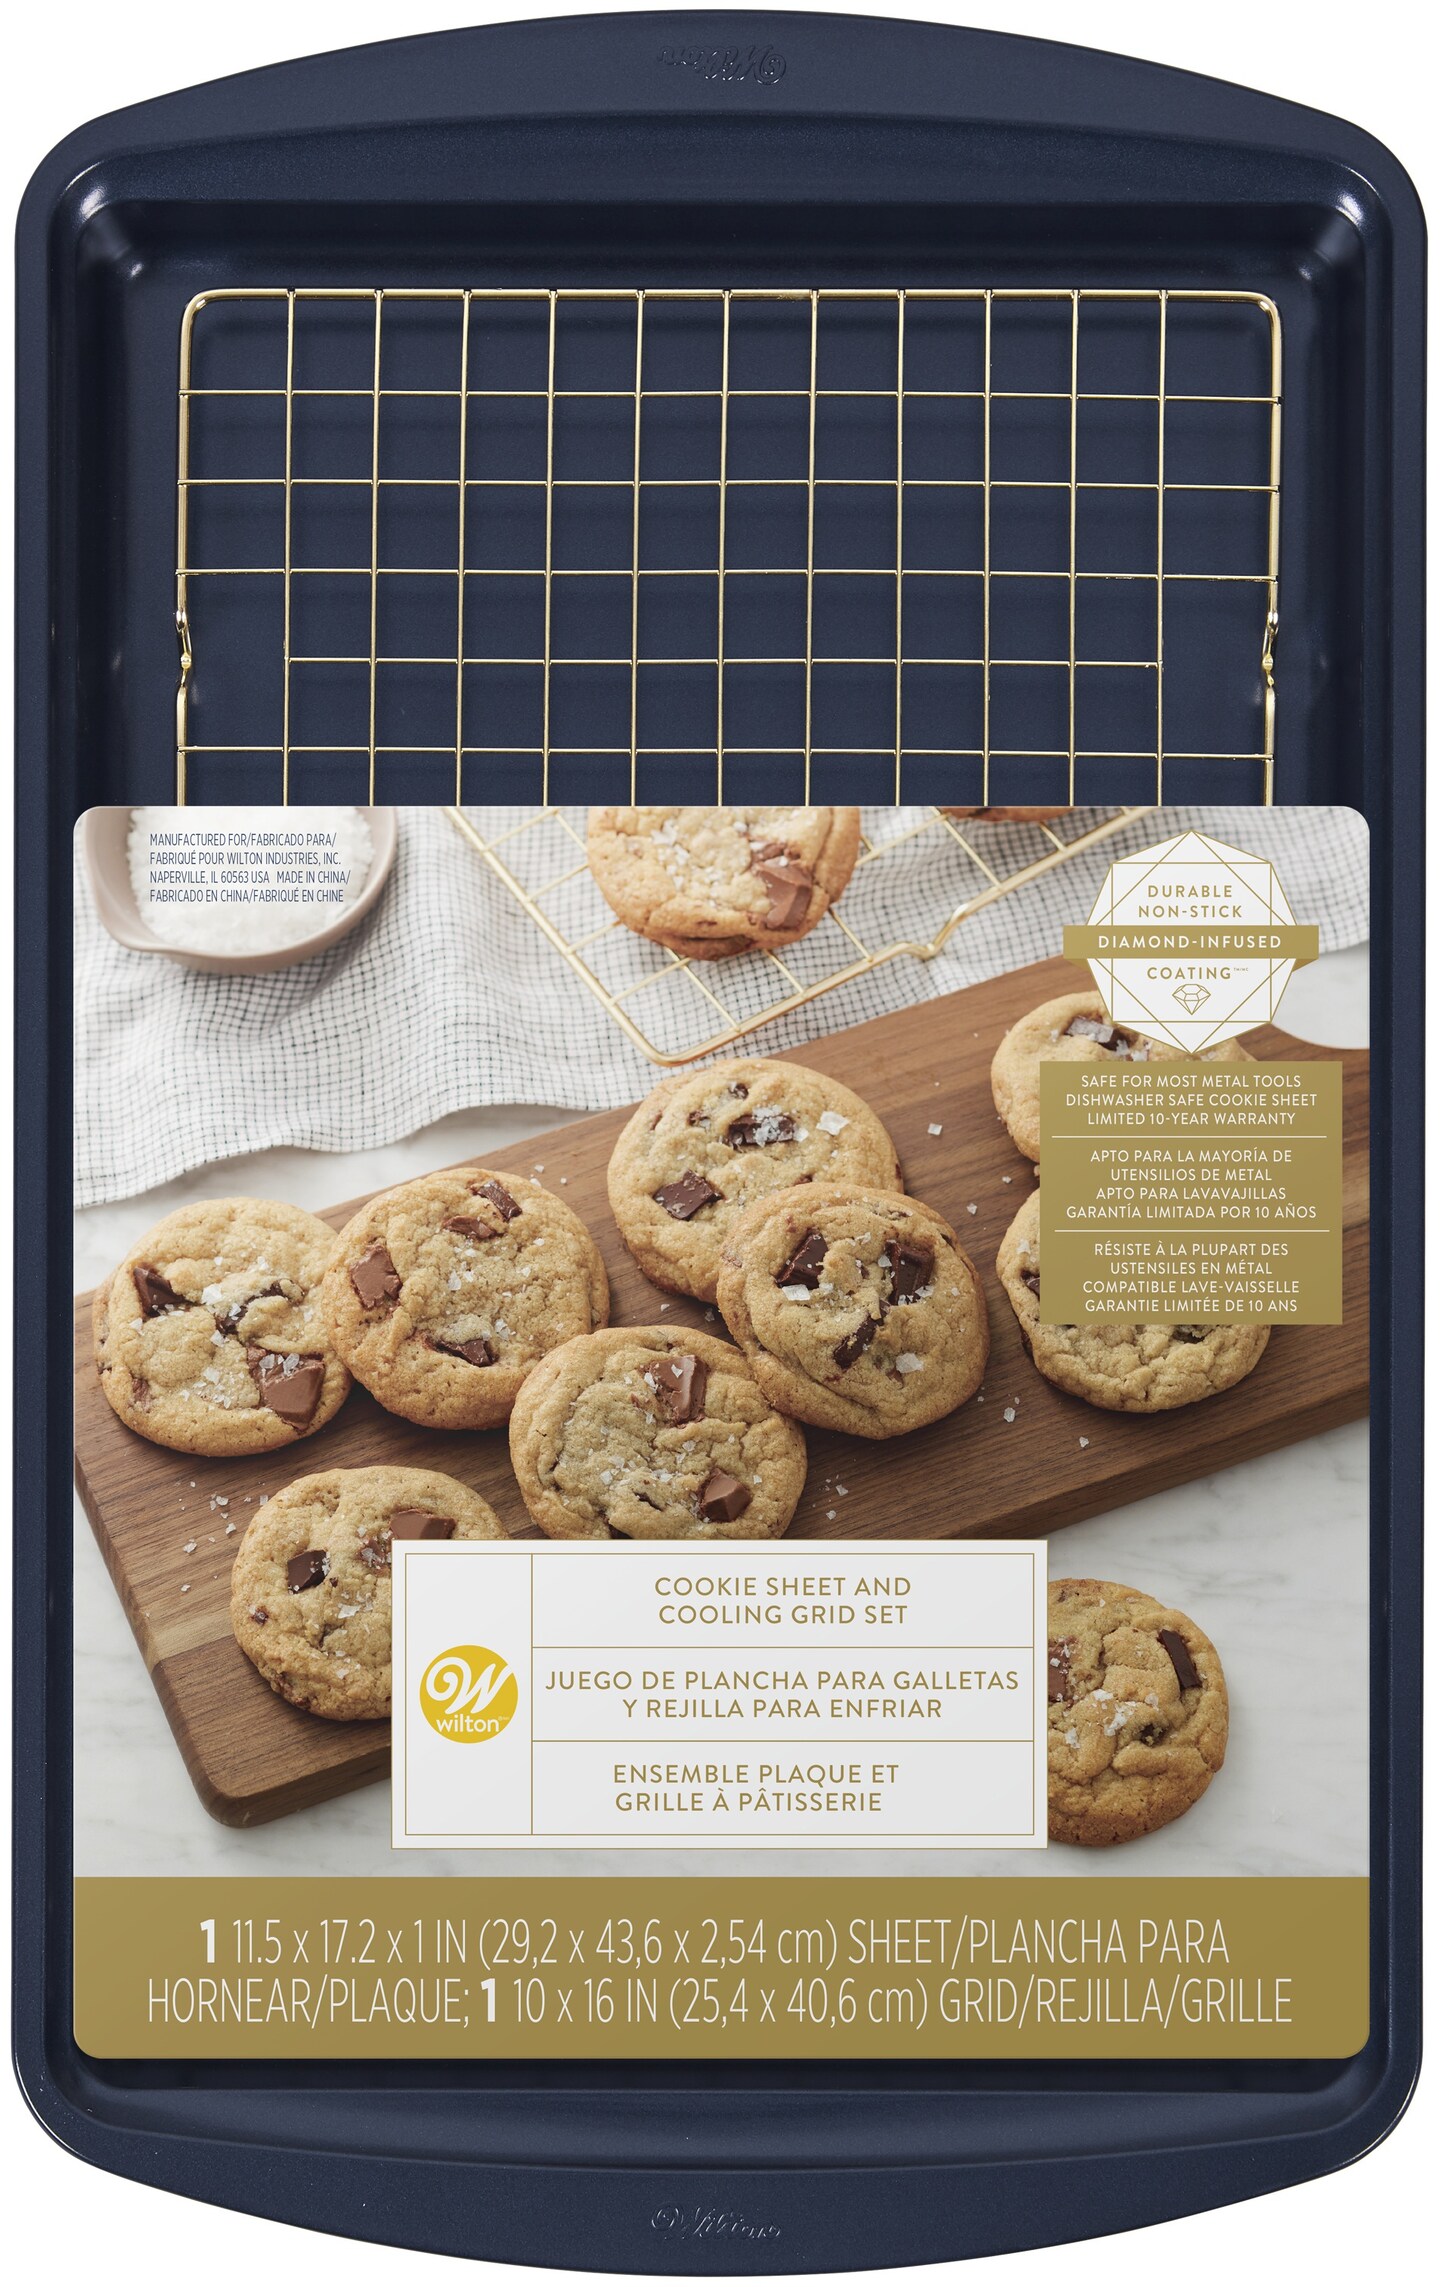 Diamond-Infused Non-Stick Cookie Sheet W/Cooling Grid Set-Large